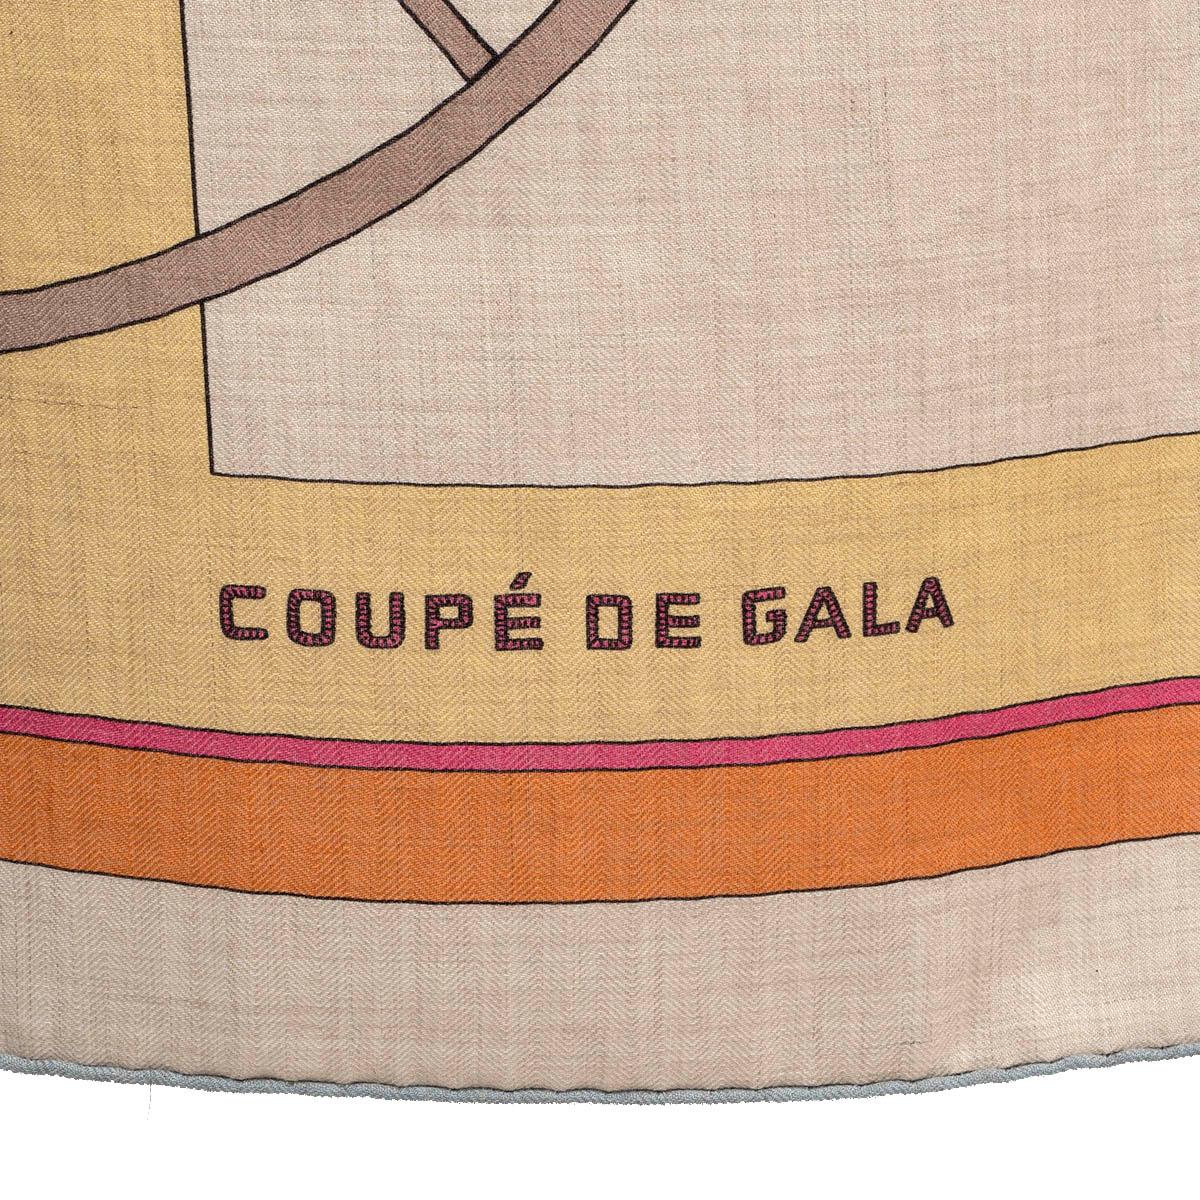 100% authentic Hermès Coupe de Gala 140 shalw by Wlodek Kaminski in Naturel cashmere (70%) and silk (30%) with details in Jaune yellow, Vieux Rose pink, baby blue, orange, red and pale green. Brand new.

Measurements
Model	H243869S 12
Width	140cm